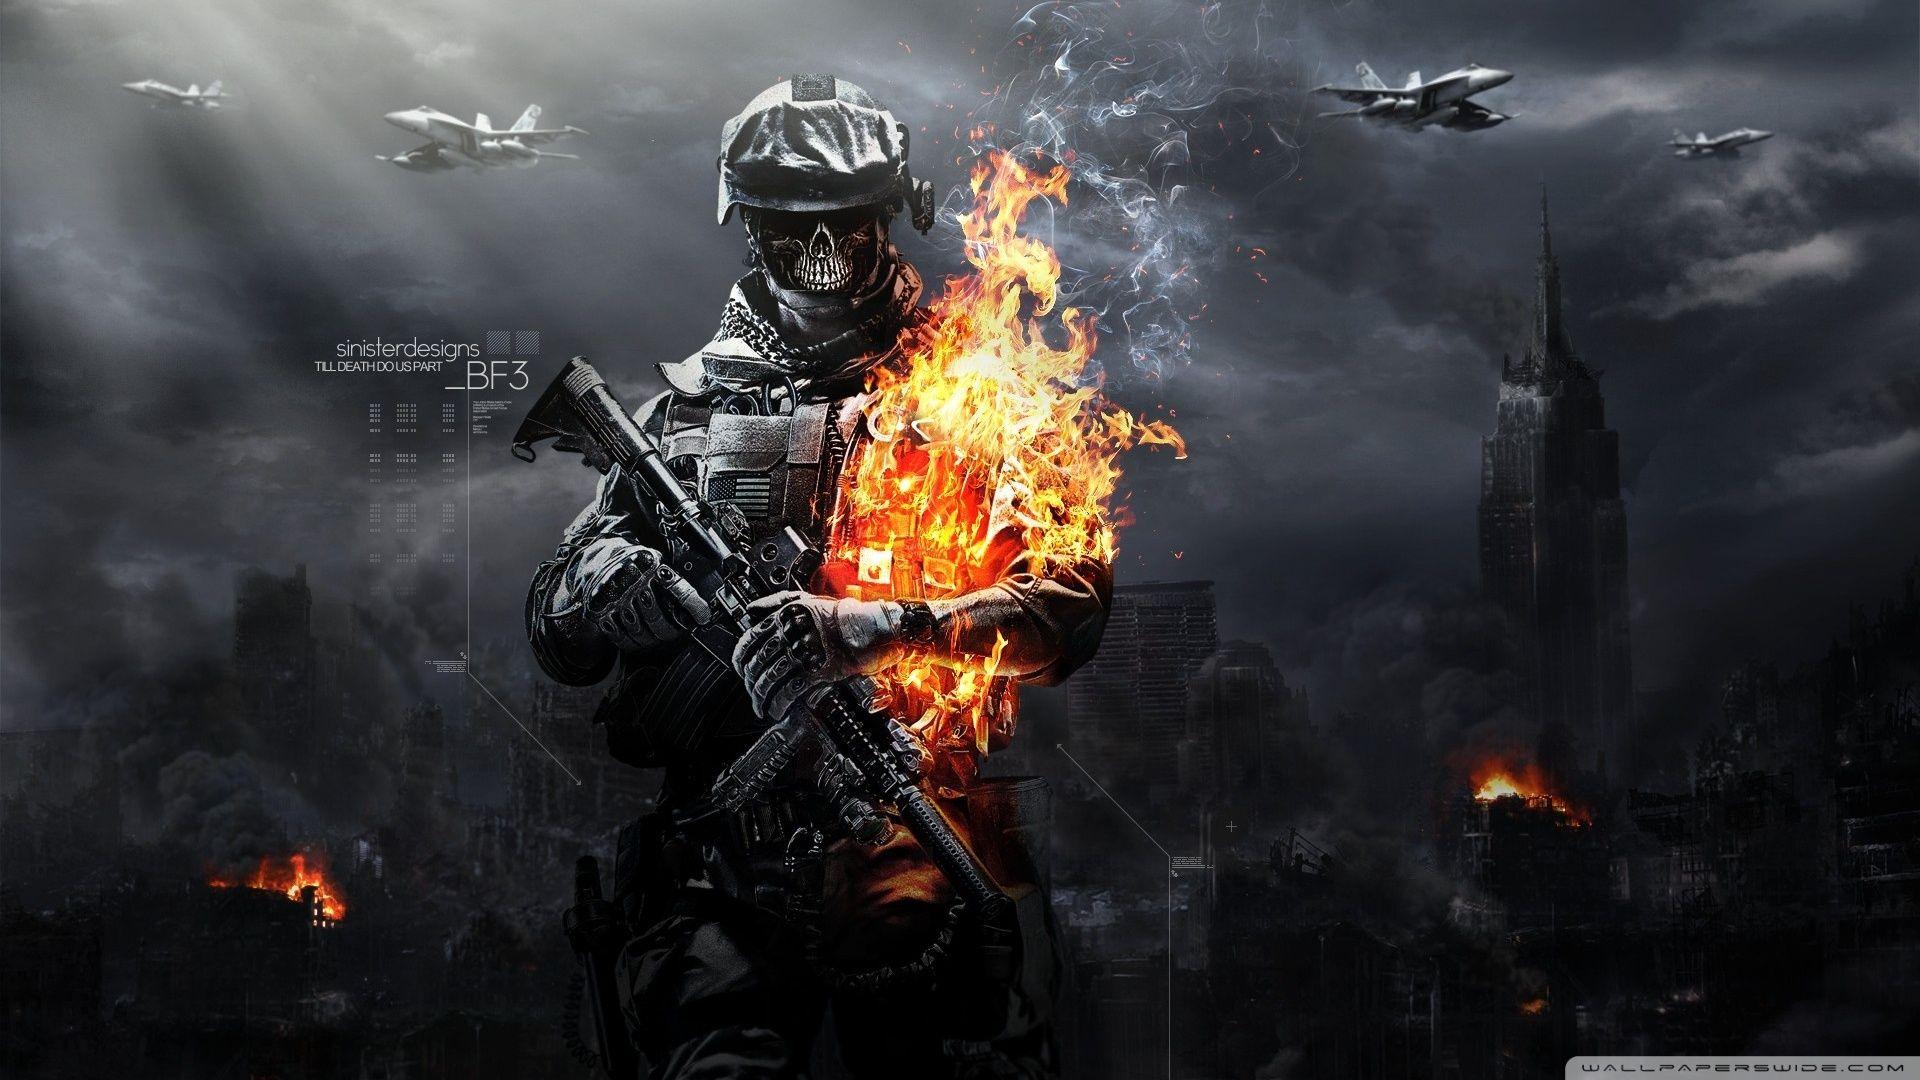 BF3 push harder. Best gaming wallpaper, Zombie wallpaper, Army wallpaper